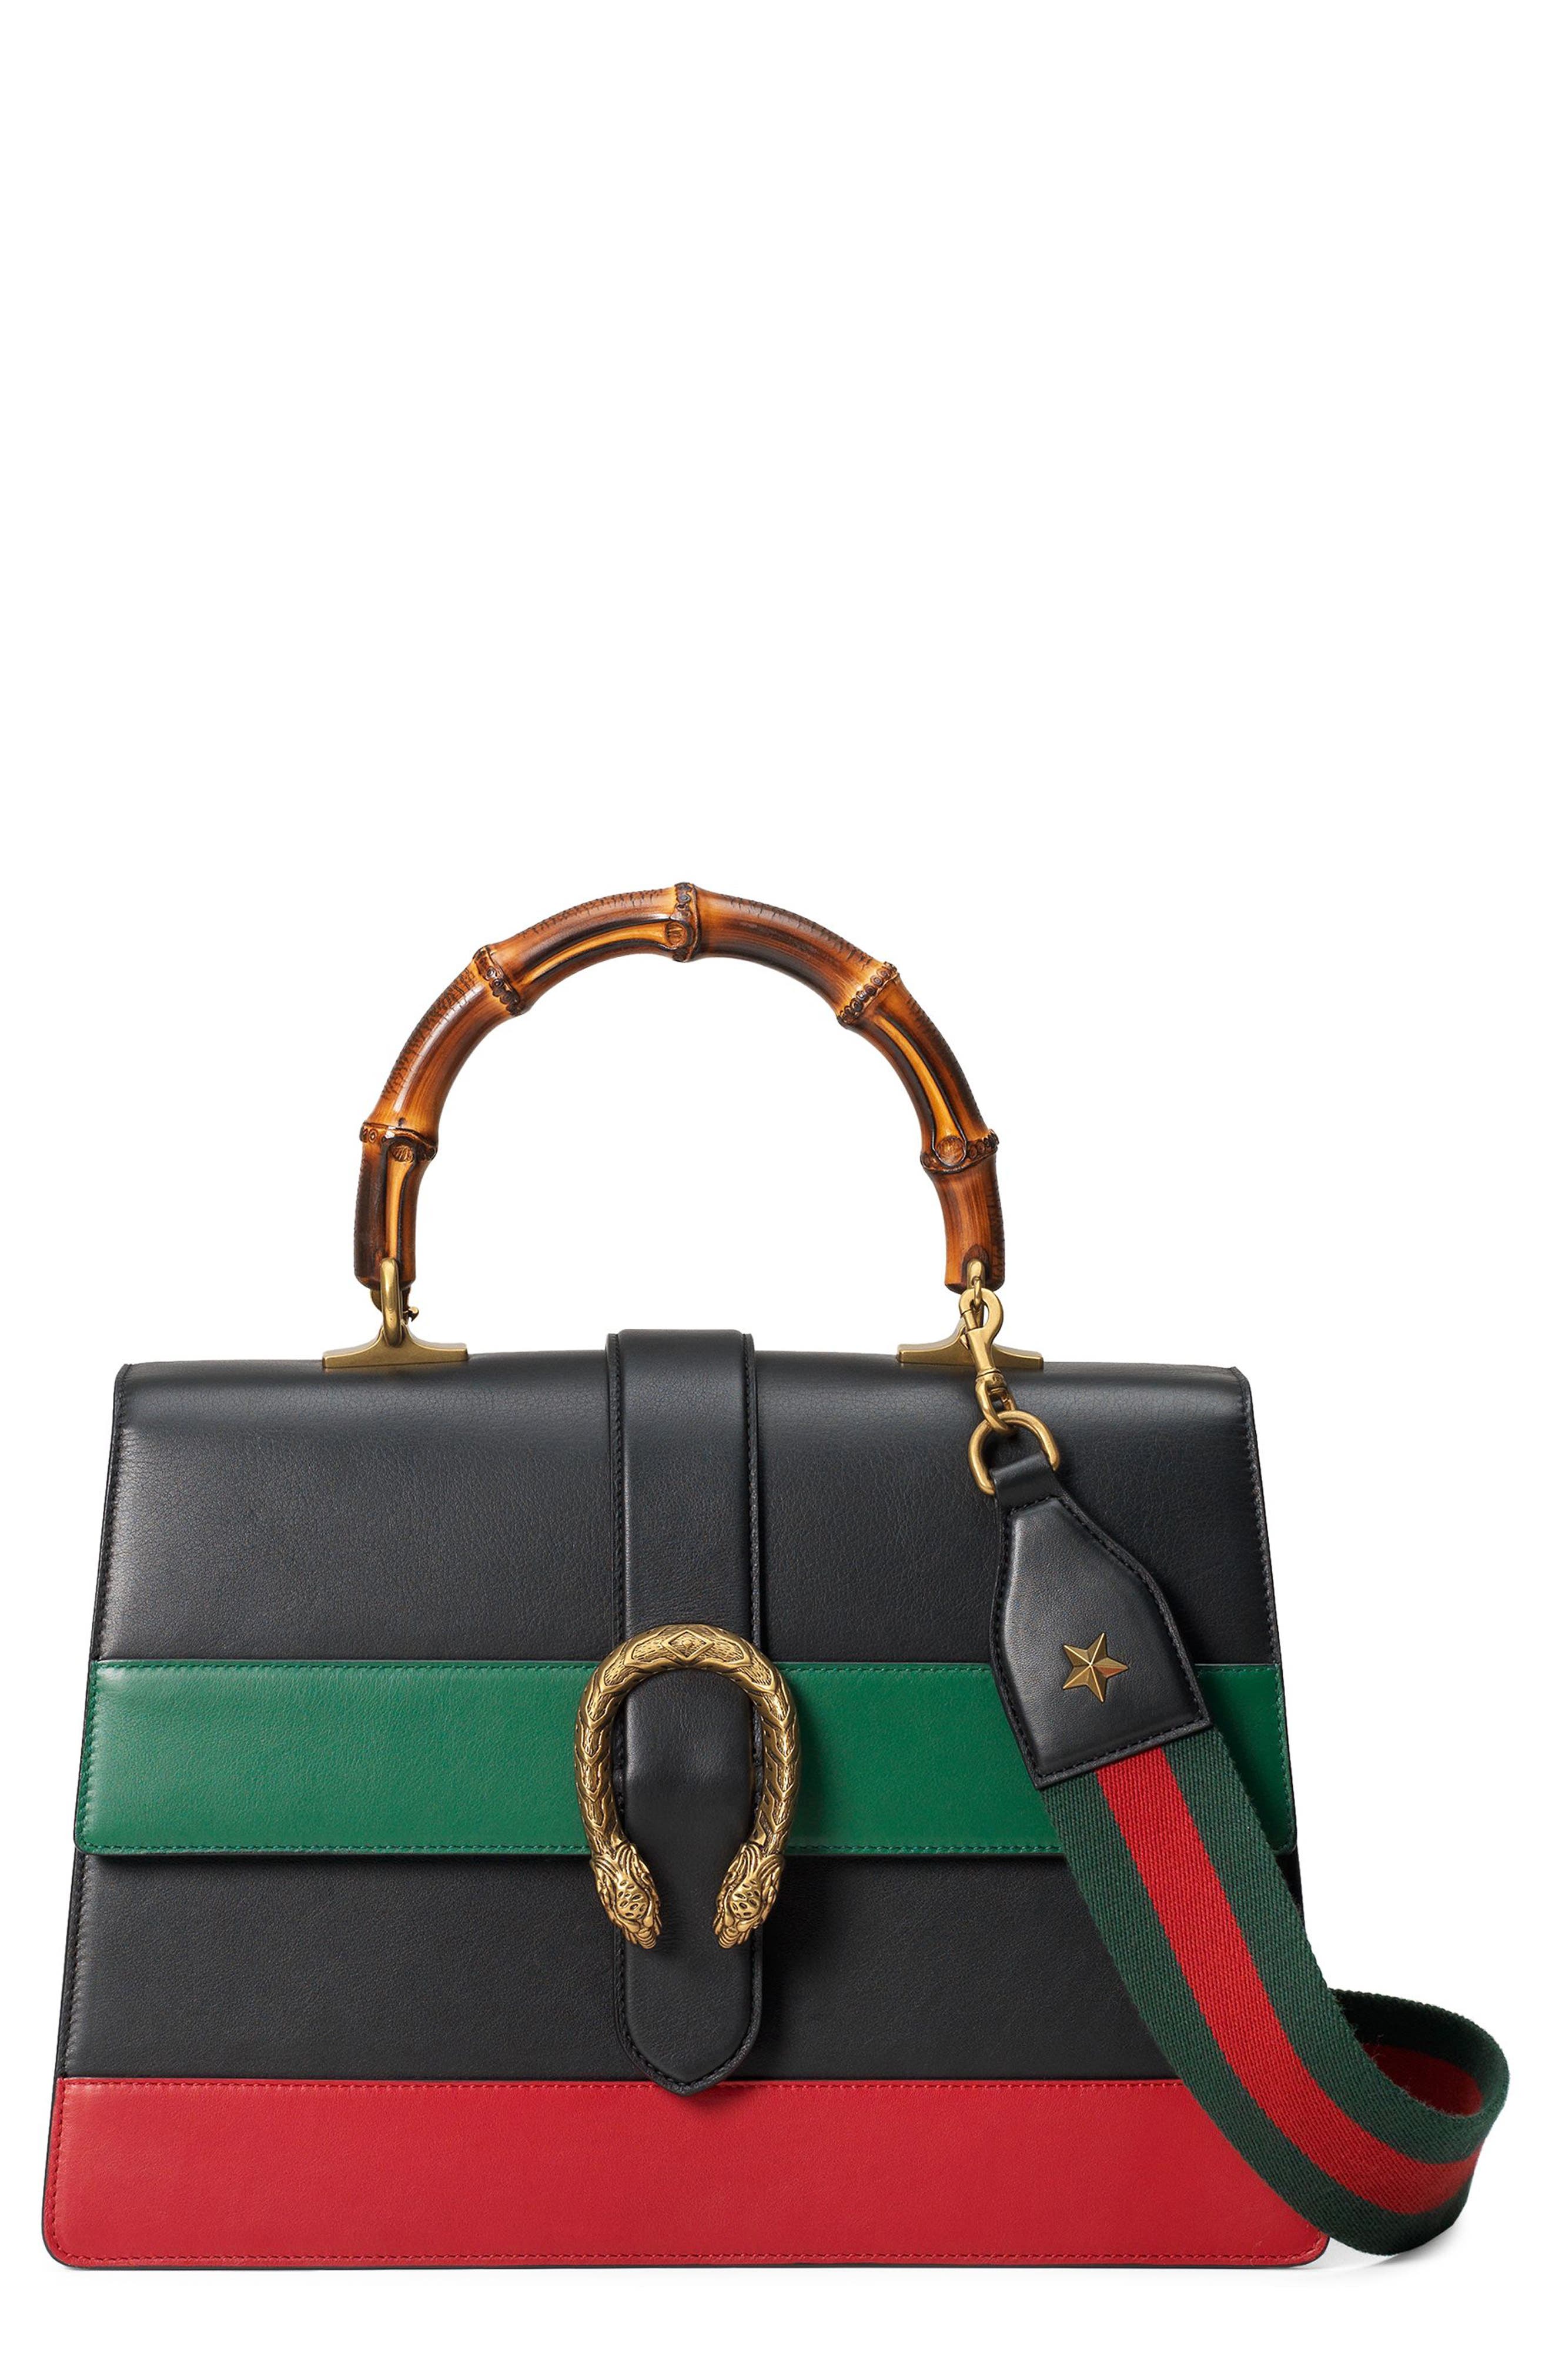 gucci purse with wooden handle